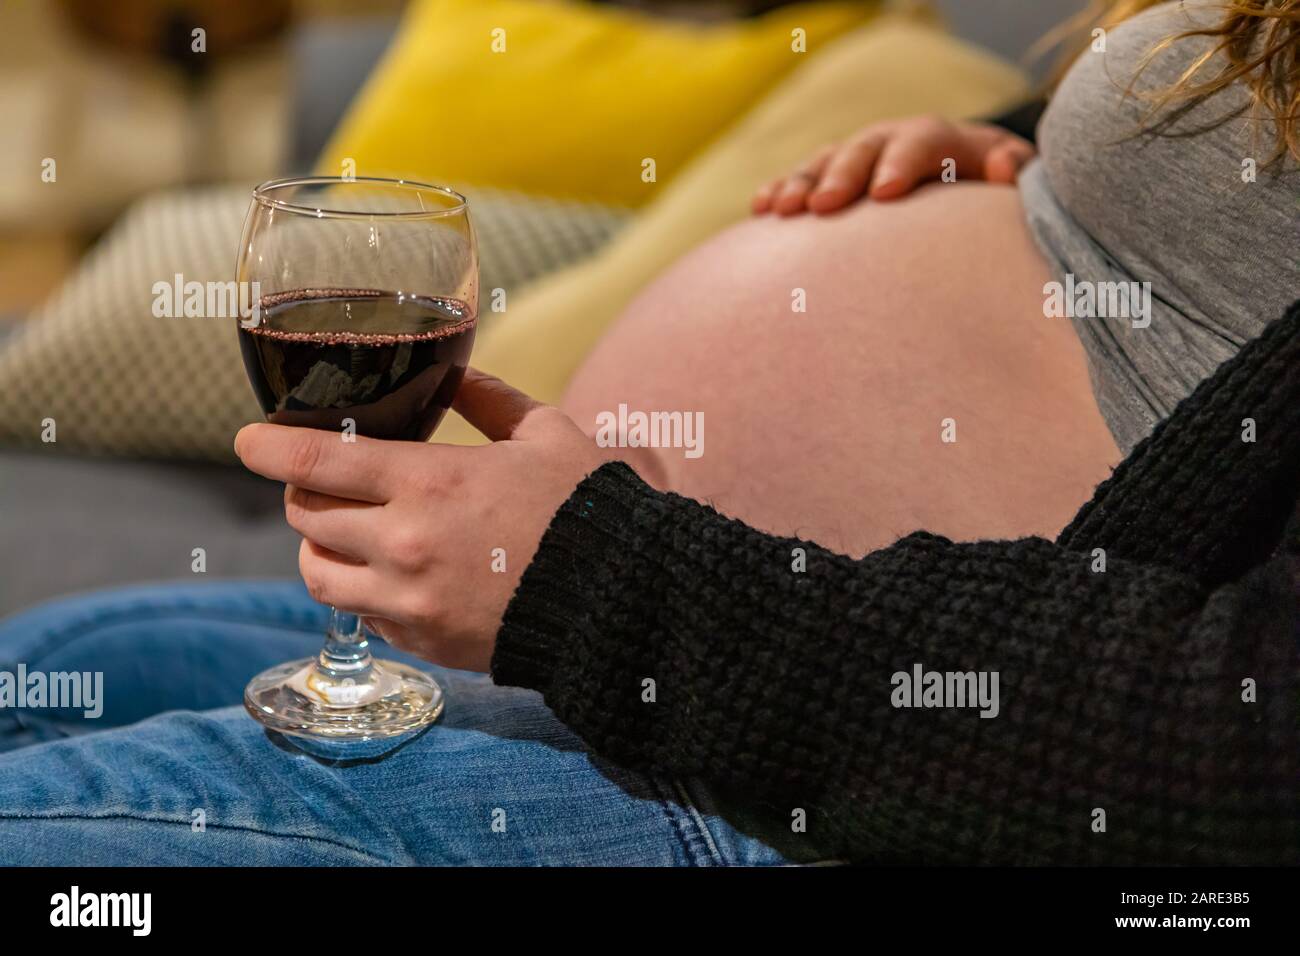 Close up and side view on the hand of a heavily pregnant woman with a glass of red wine in hand. Drinking alcohol possible causing harm to unborn baby Stock Photo